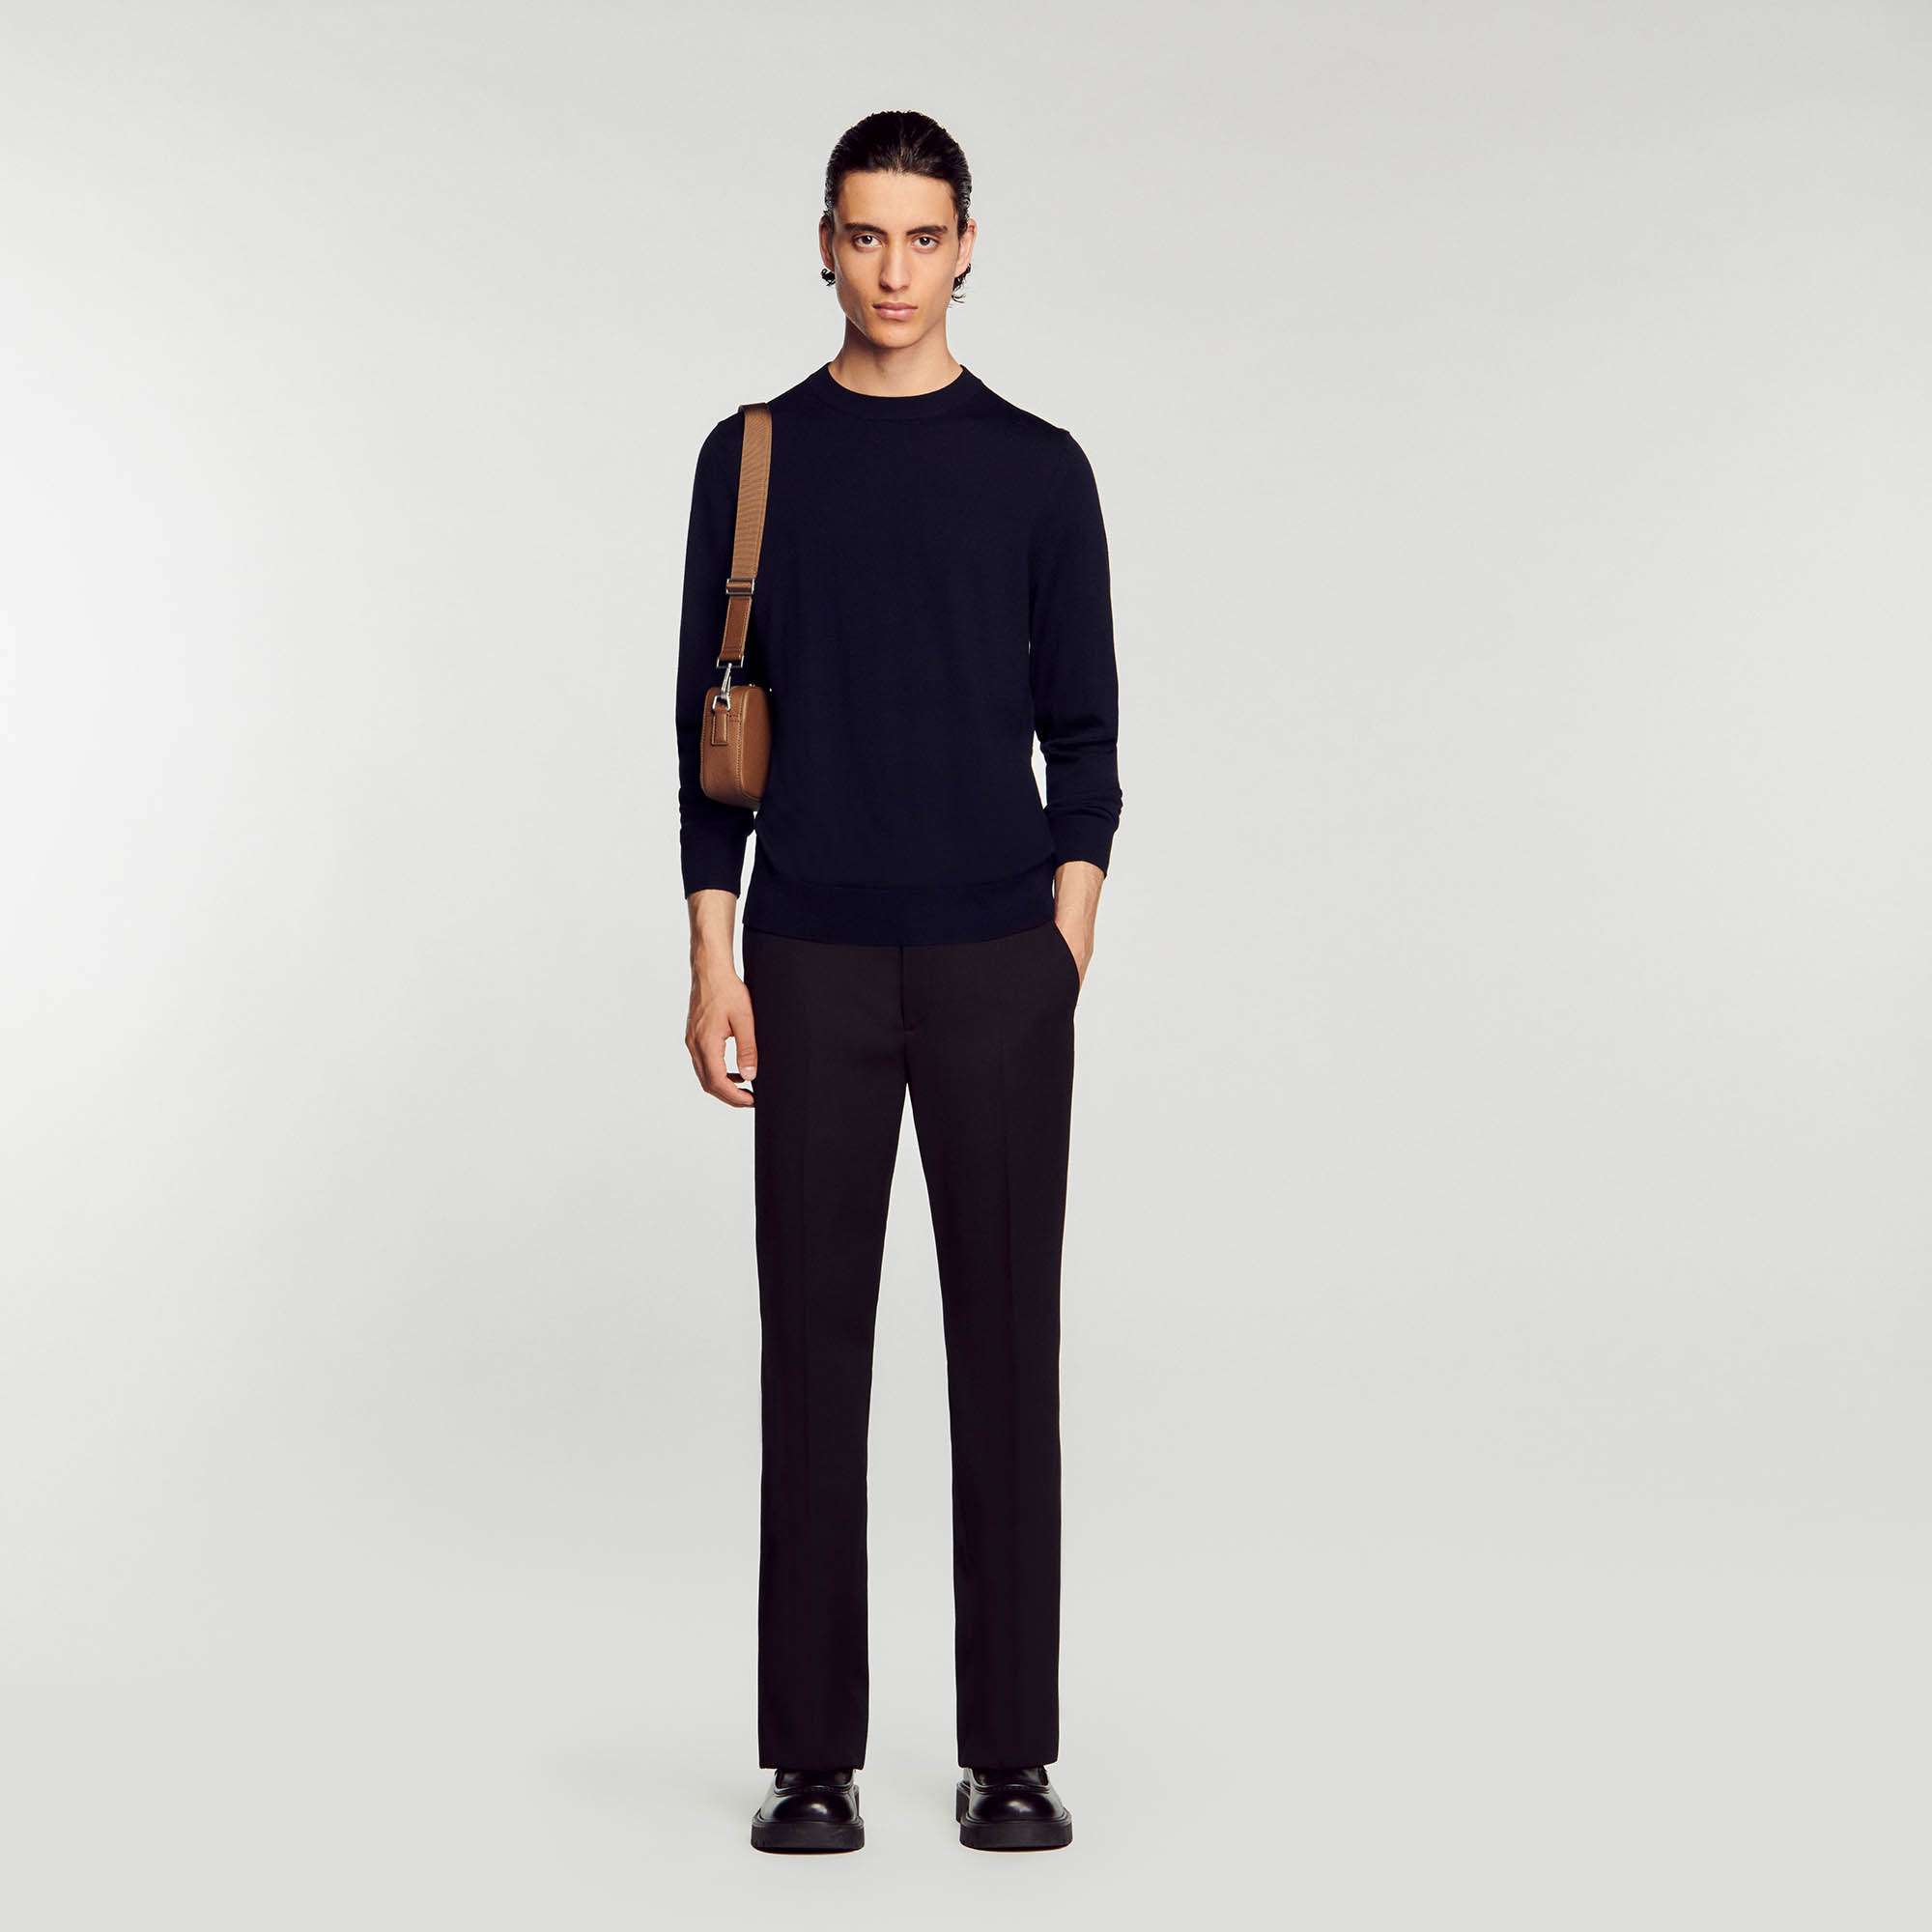 Sandro wool Rib: Knitted merino sweater with a round neck and long sleeves